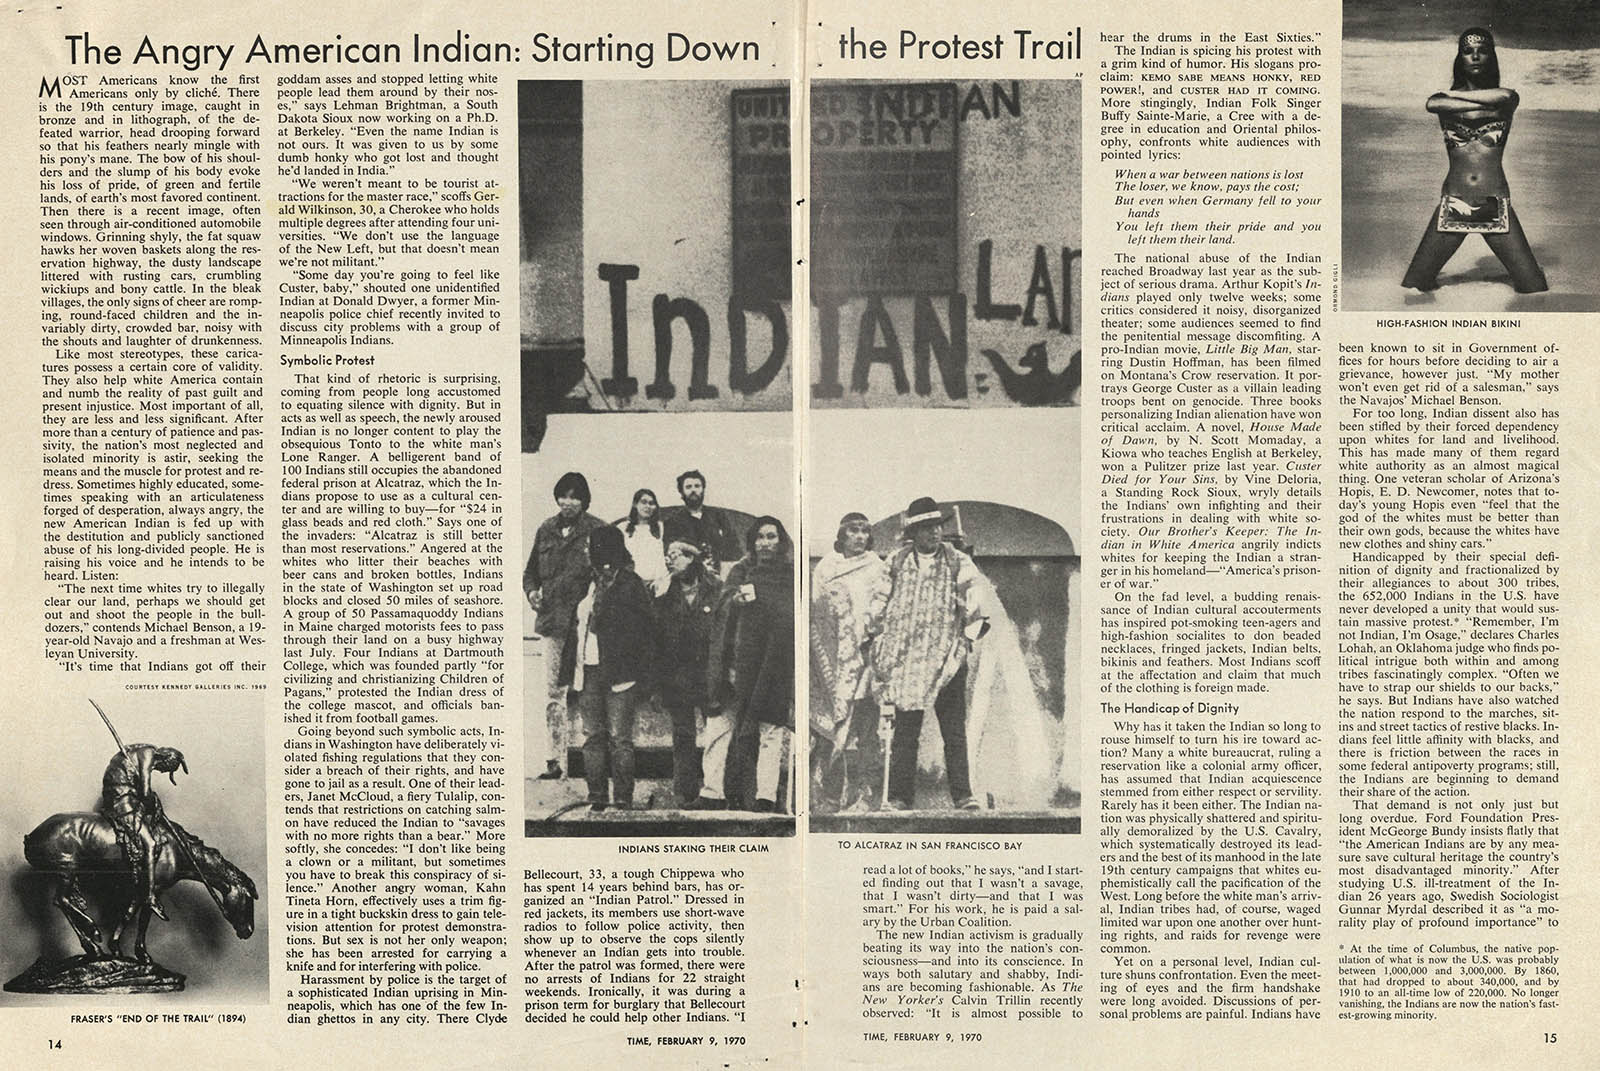 “The Angry American Indian: Starting Down the Protest Trail”